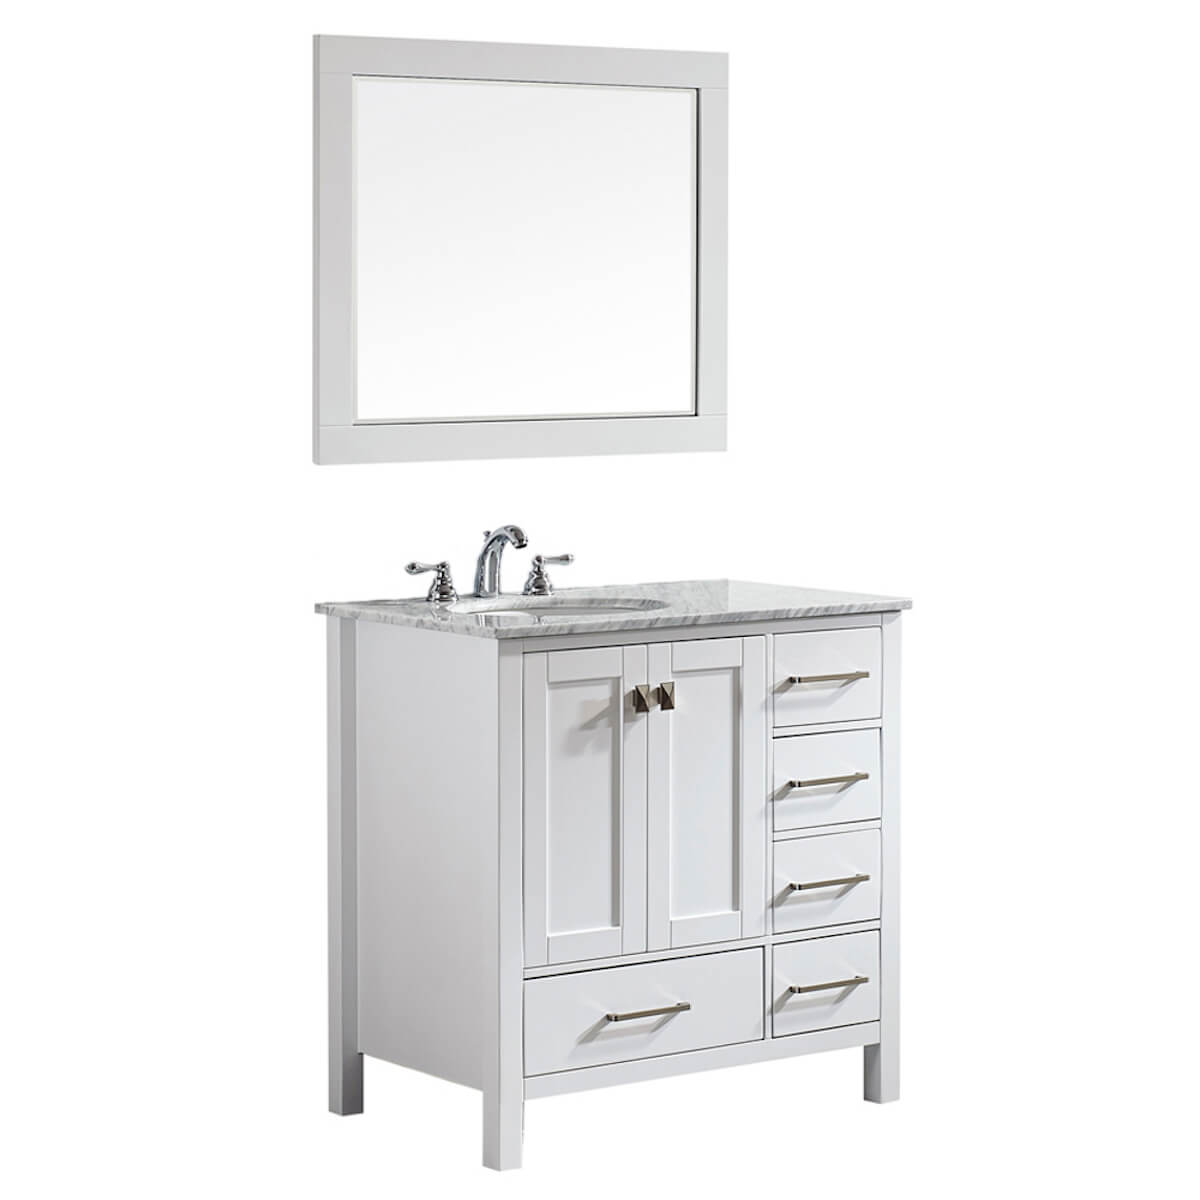 Vinnova Gela 36" White Freestanding Single Vanity with Carrara White Marble Countertop With Mirror Side 723036-WH-CA